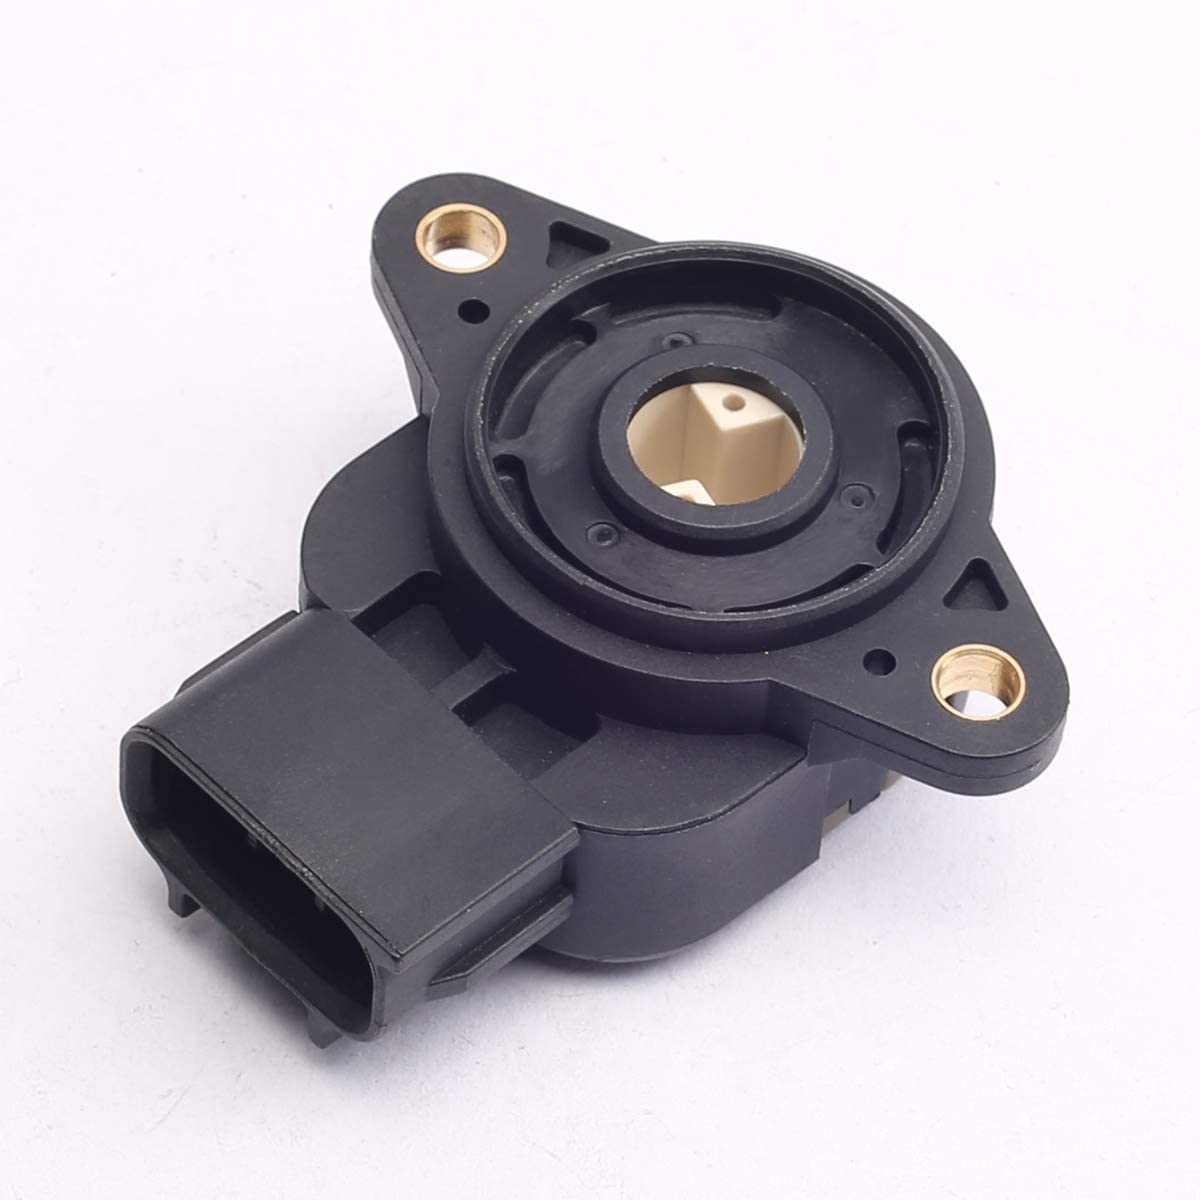 PeakCar 89452-35020 Throttle Position Sensor TPS Compatible with 4Runner Celica Hilux Matrix T100 Tacoma Tundra Pontiac Vibe - Replaces 337-60761, 198500-1061, 88970220, 89452-35100,89452-12040